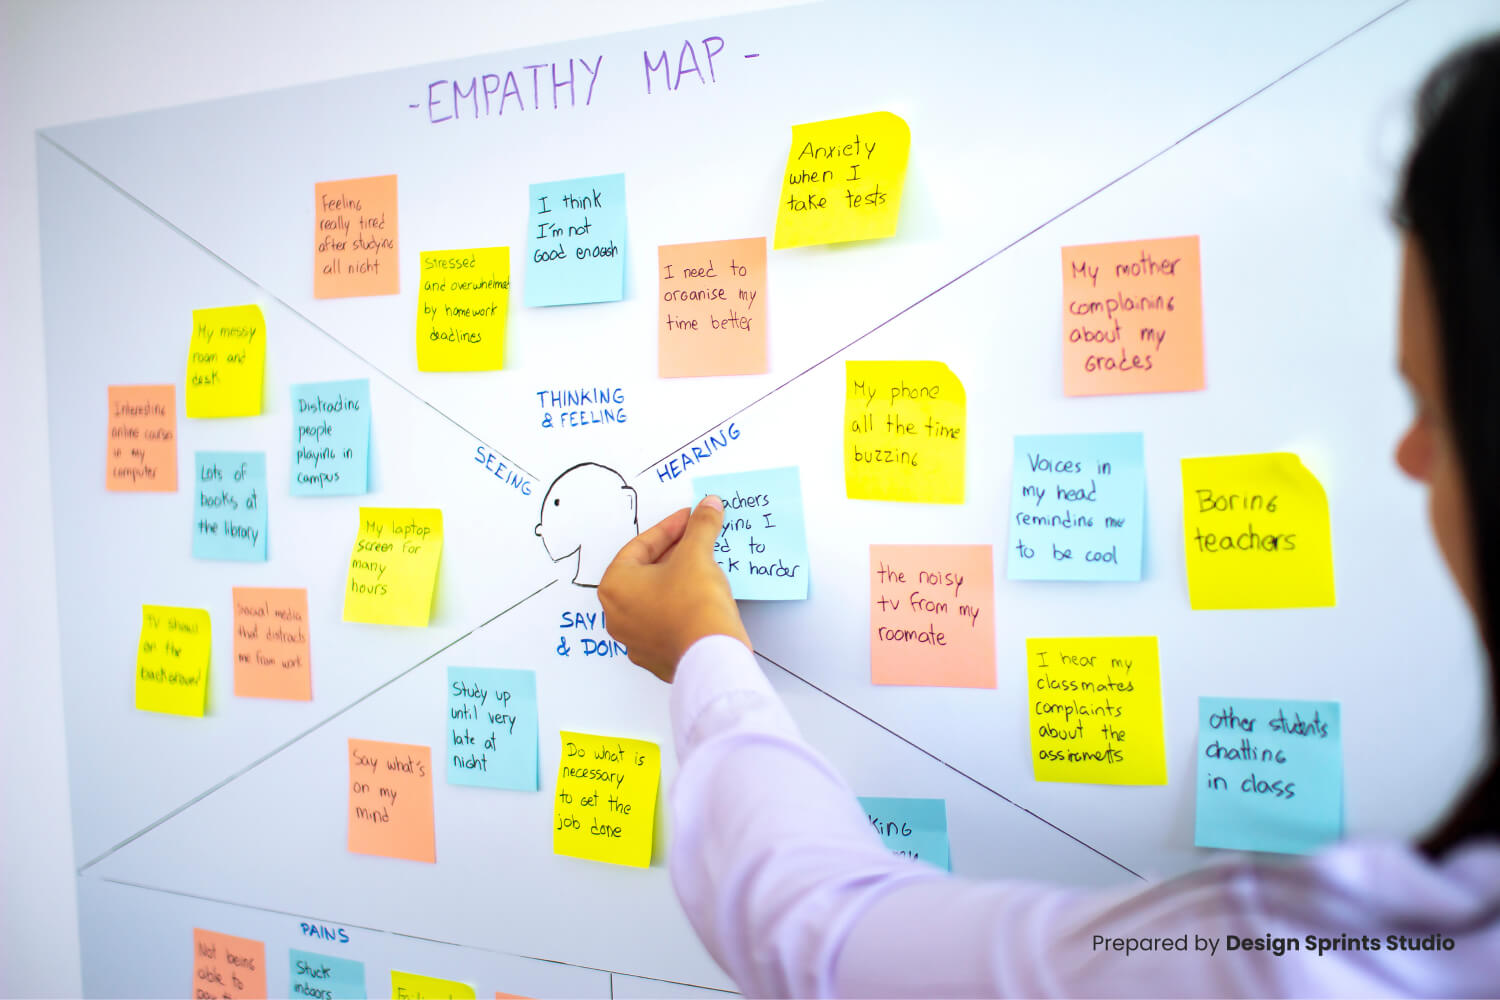 Practice empathy and prioritize the needs of your users